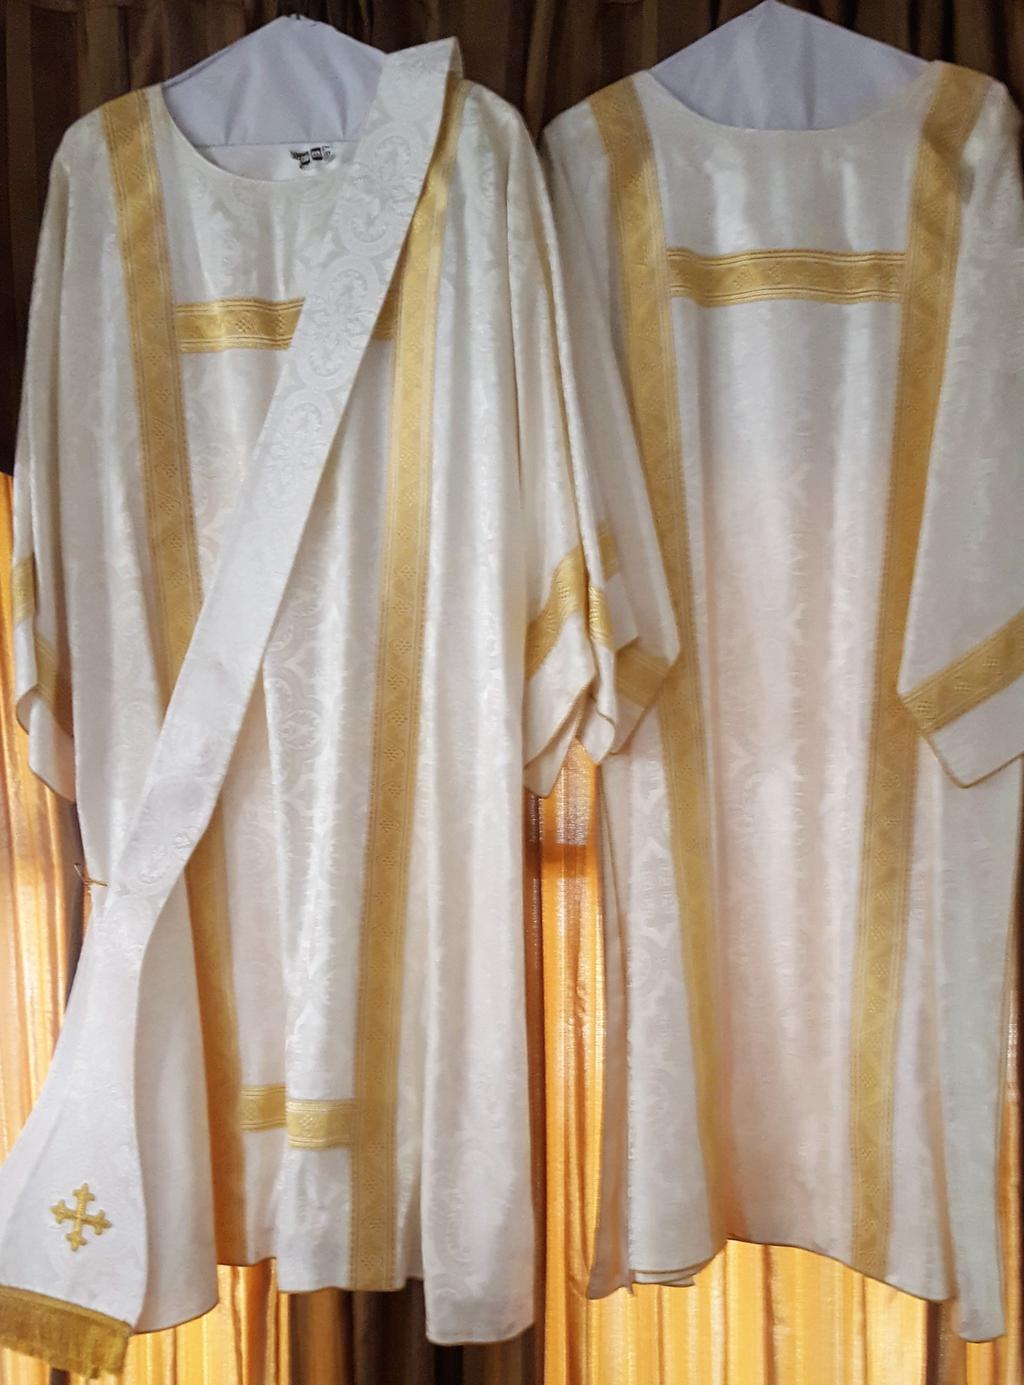 2 much-needed additional vestments. At present, St. Luke's possesses only two complete sets of vestments in the liturgical colors of red and white.